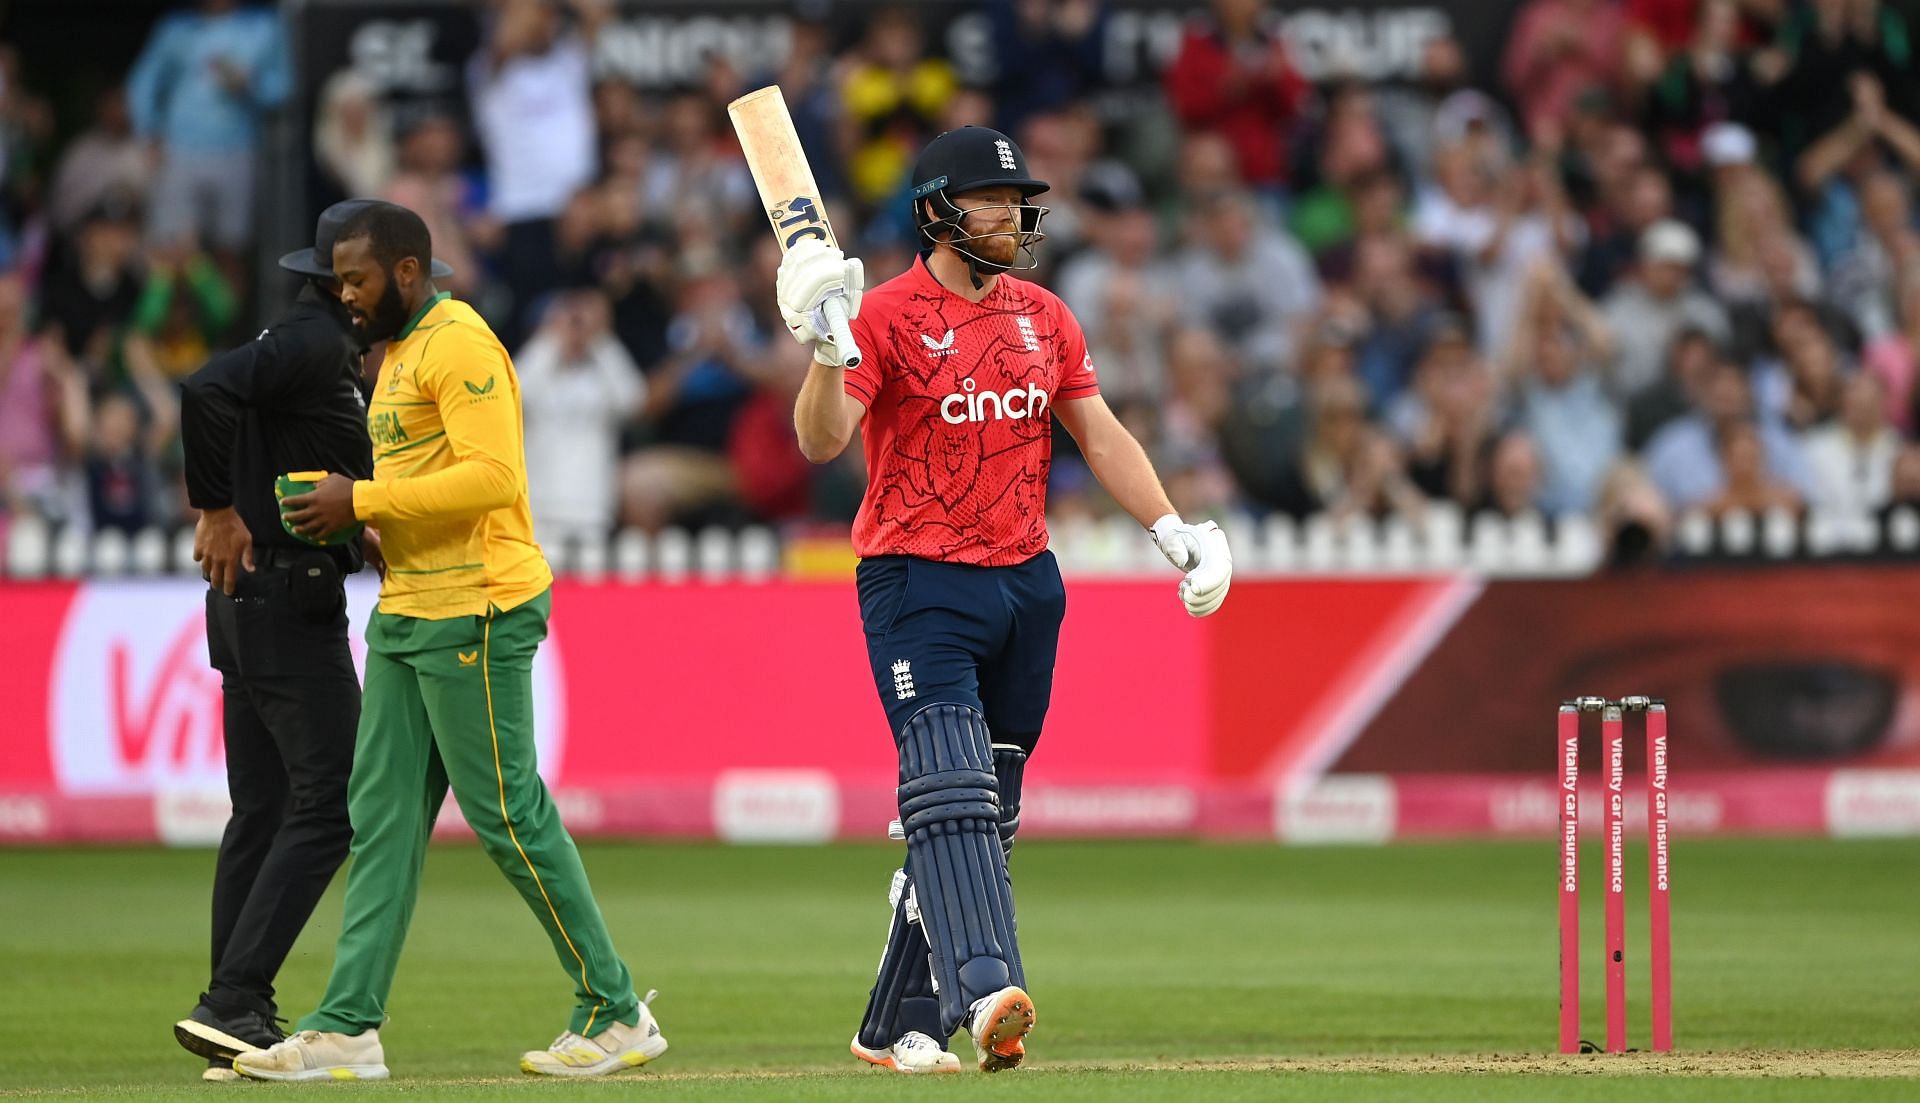 England v South Africa - 1st Vitality IT20 (Image Courtesy:Getty Images)